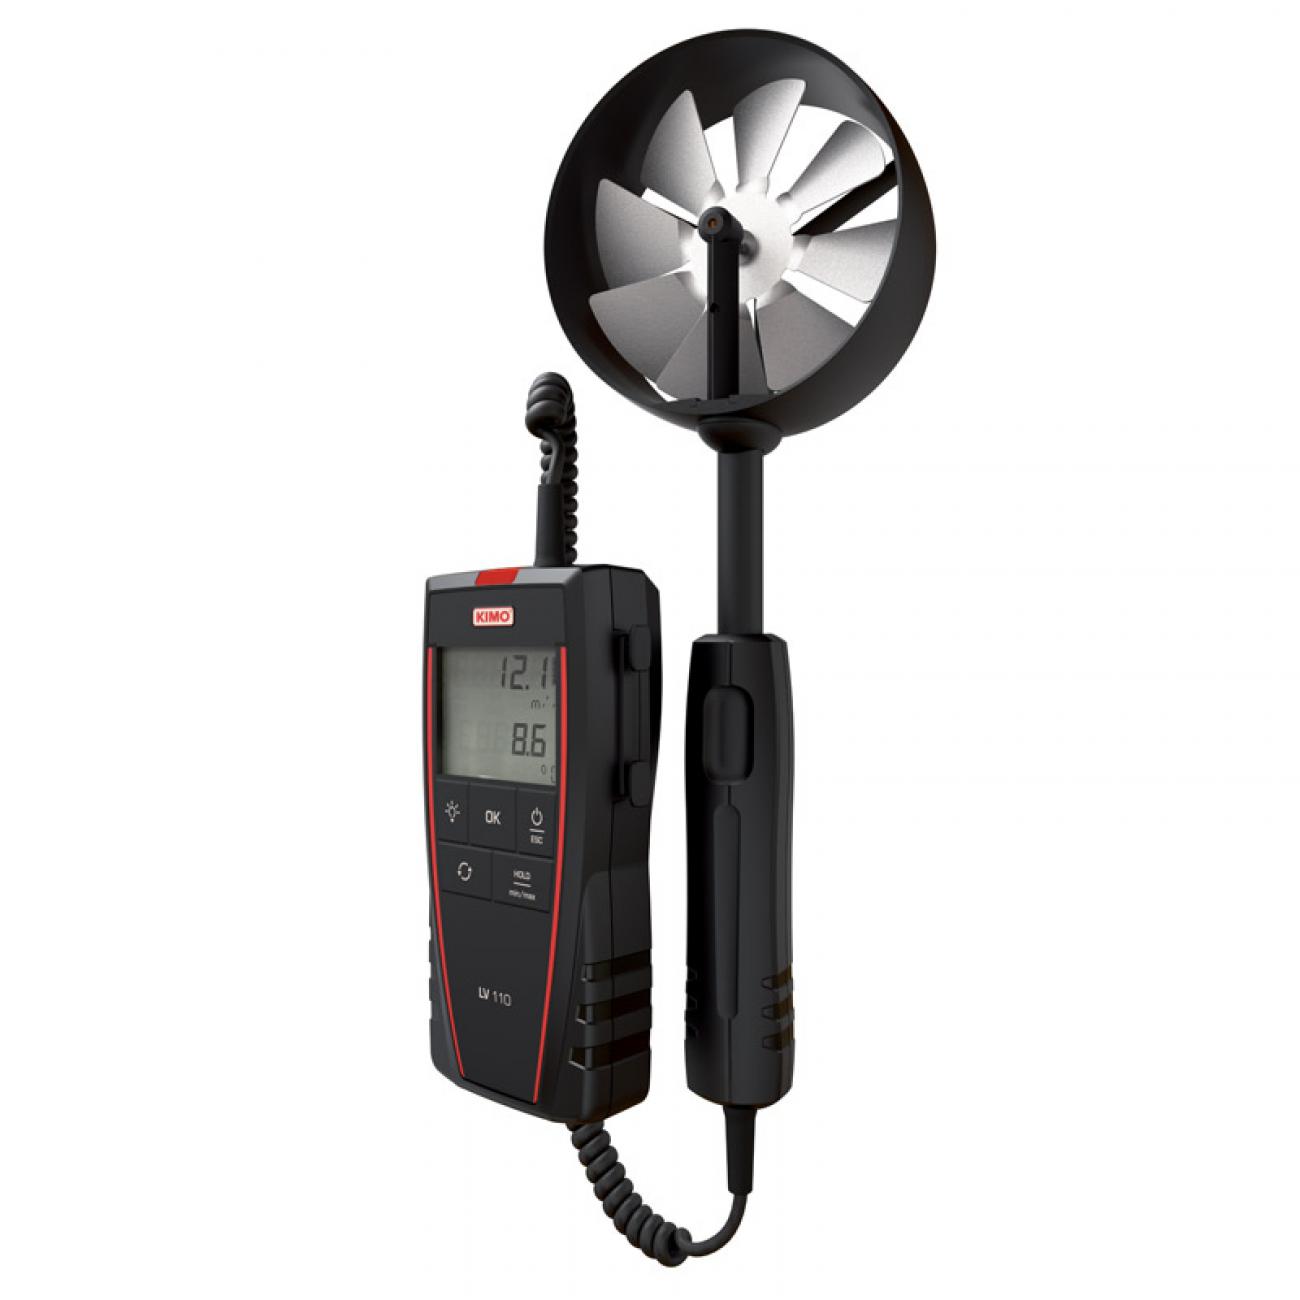 LV 110 / 111 / 117 Thermo-anemometer with integrated vane probe